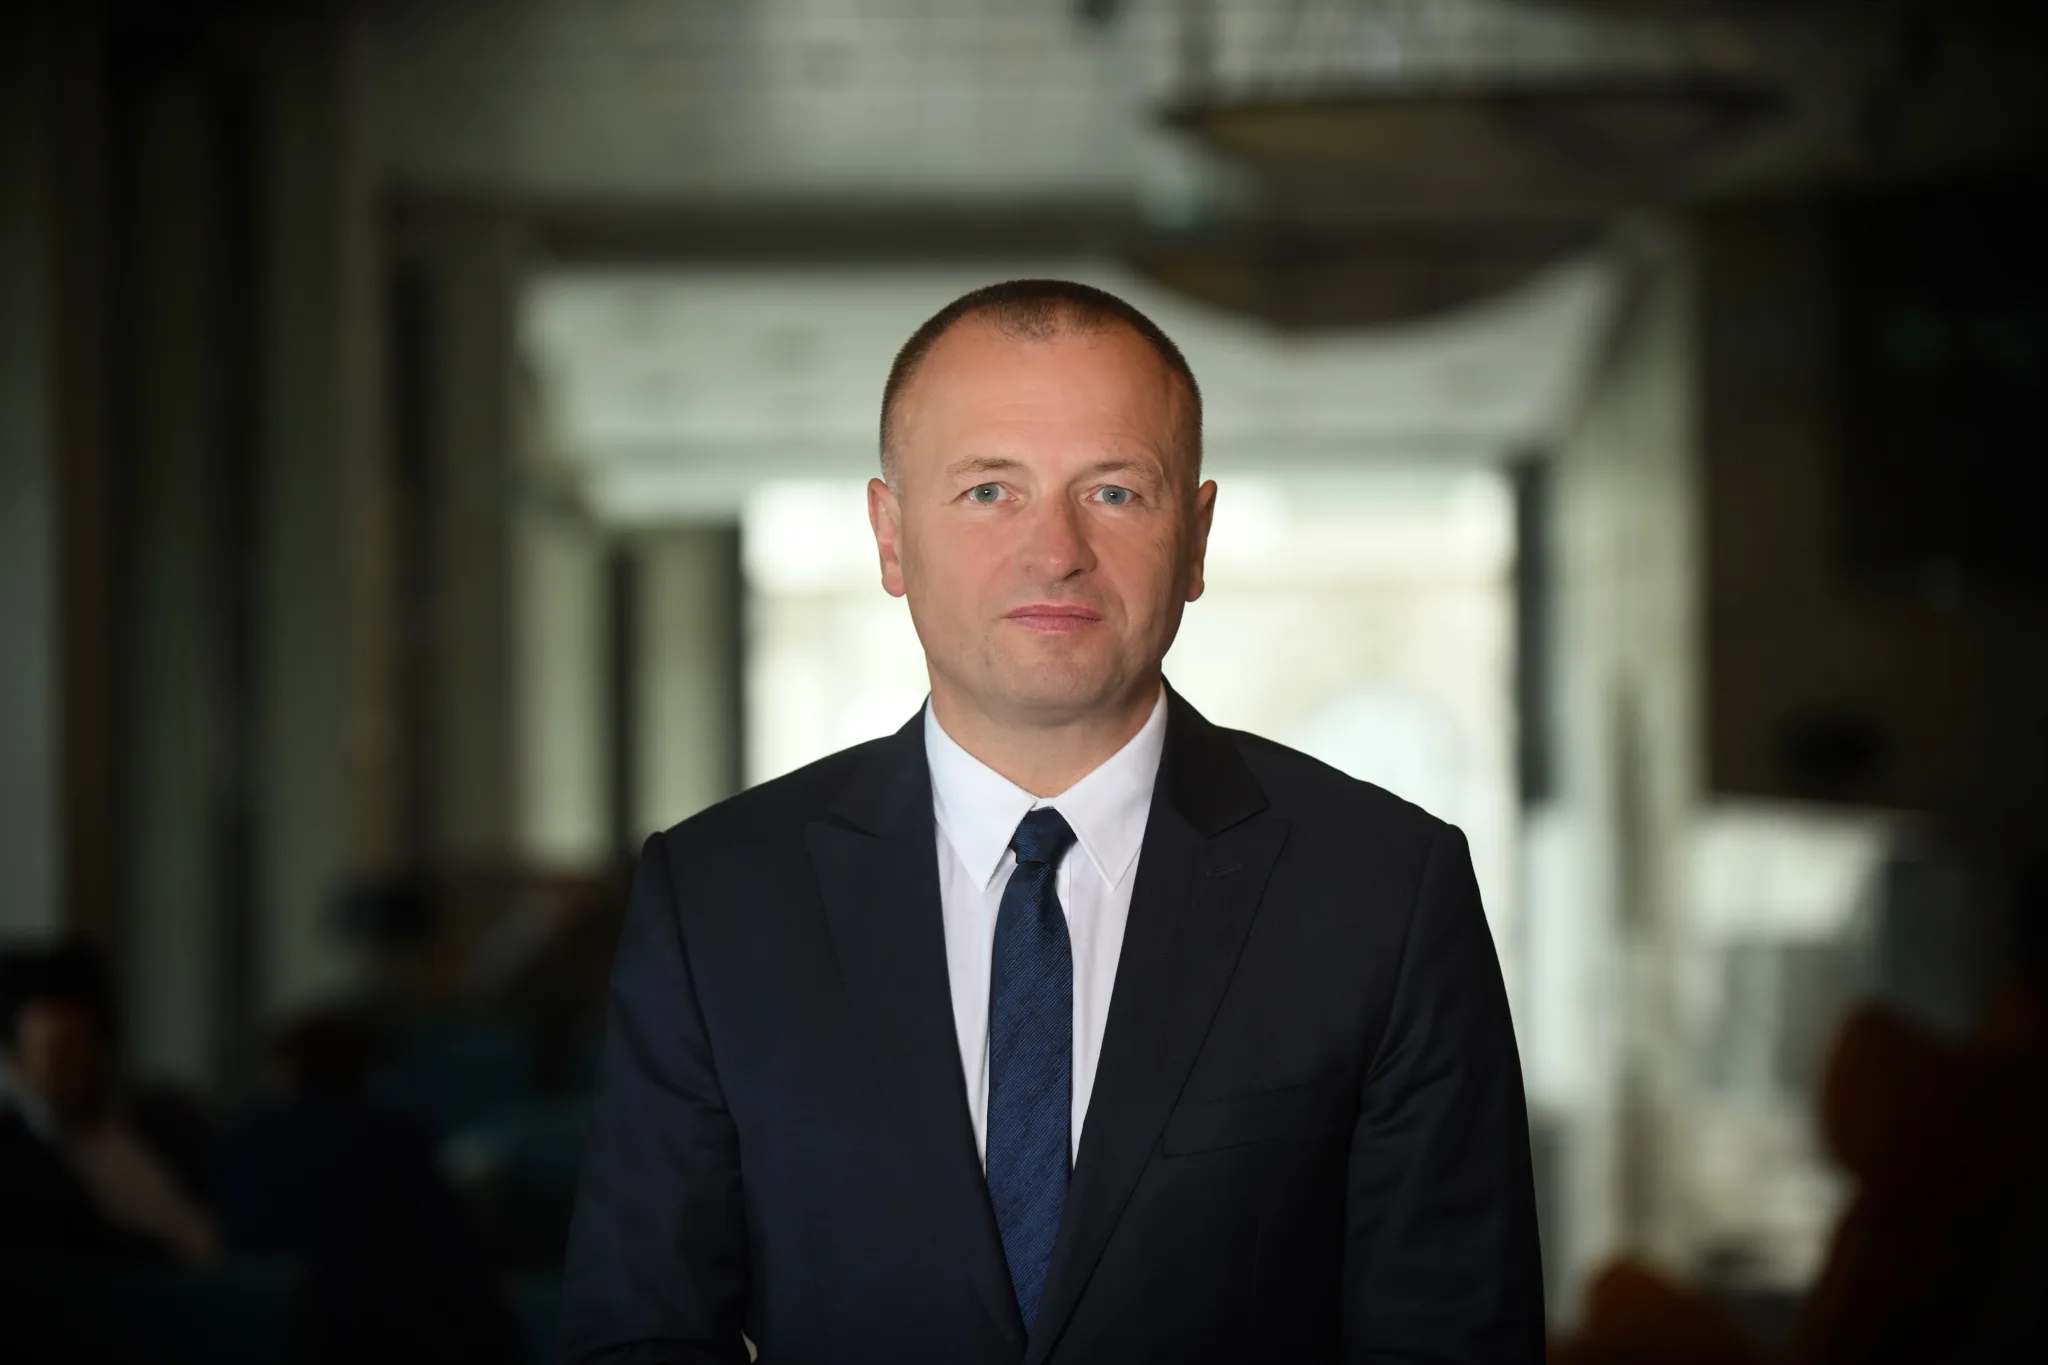 Sławomir Panasiuk, Vice President of the GPW Management Board